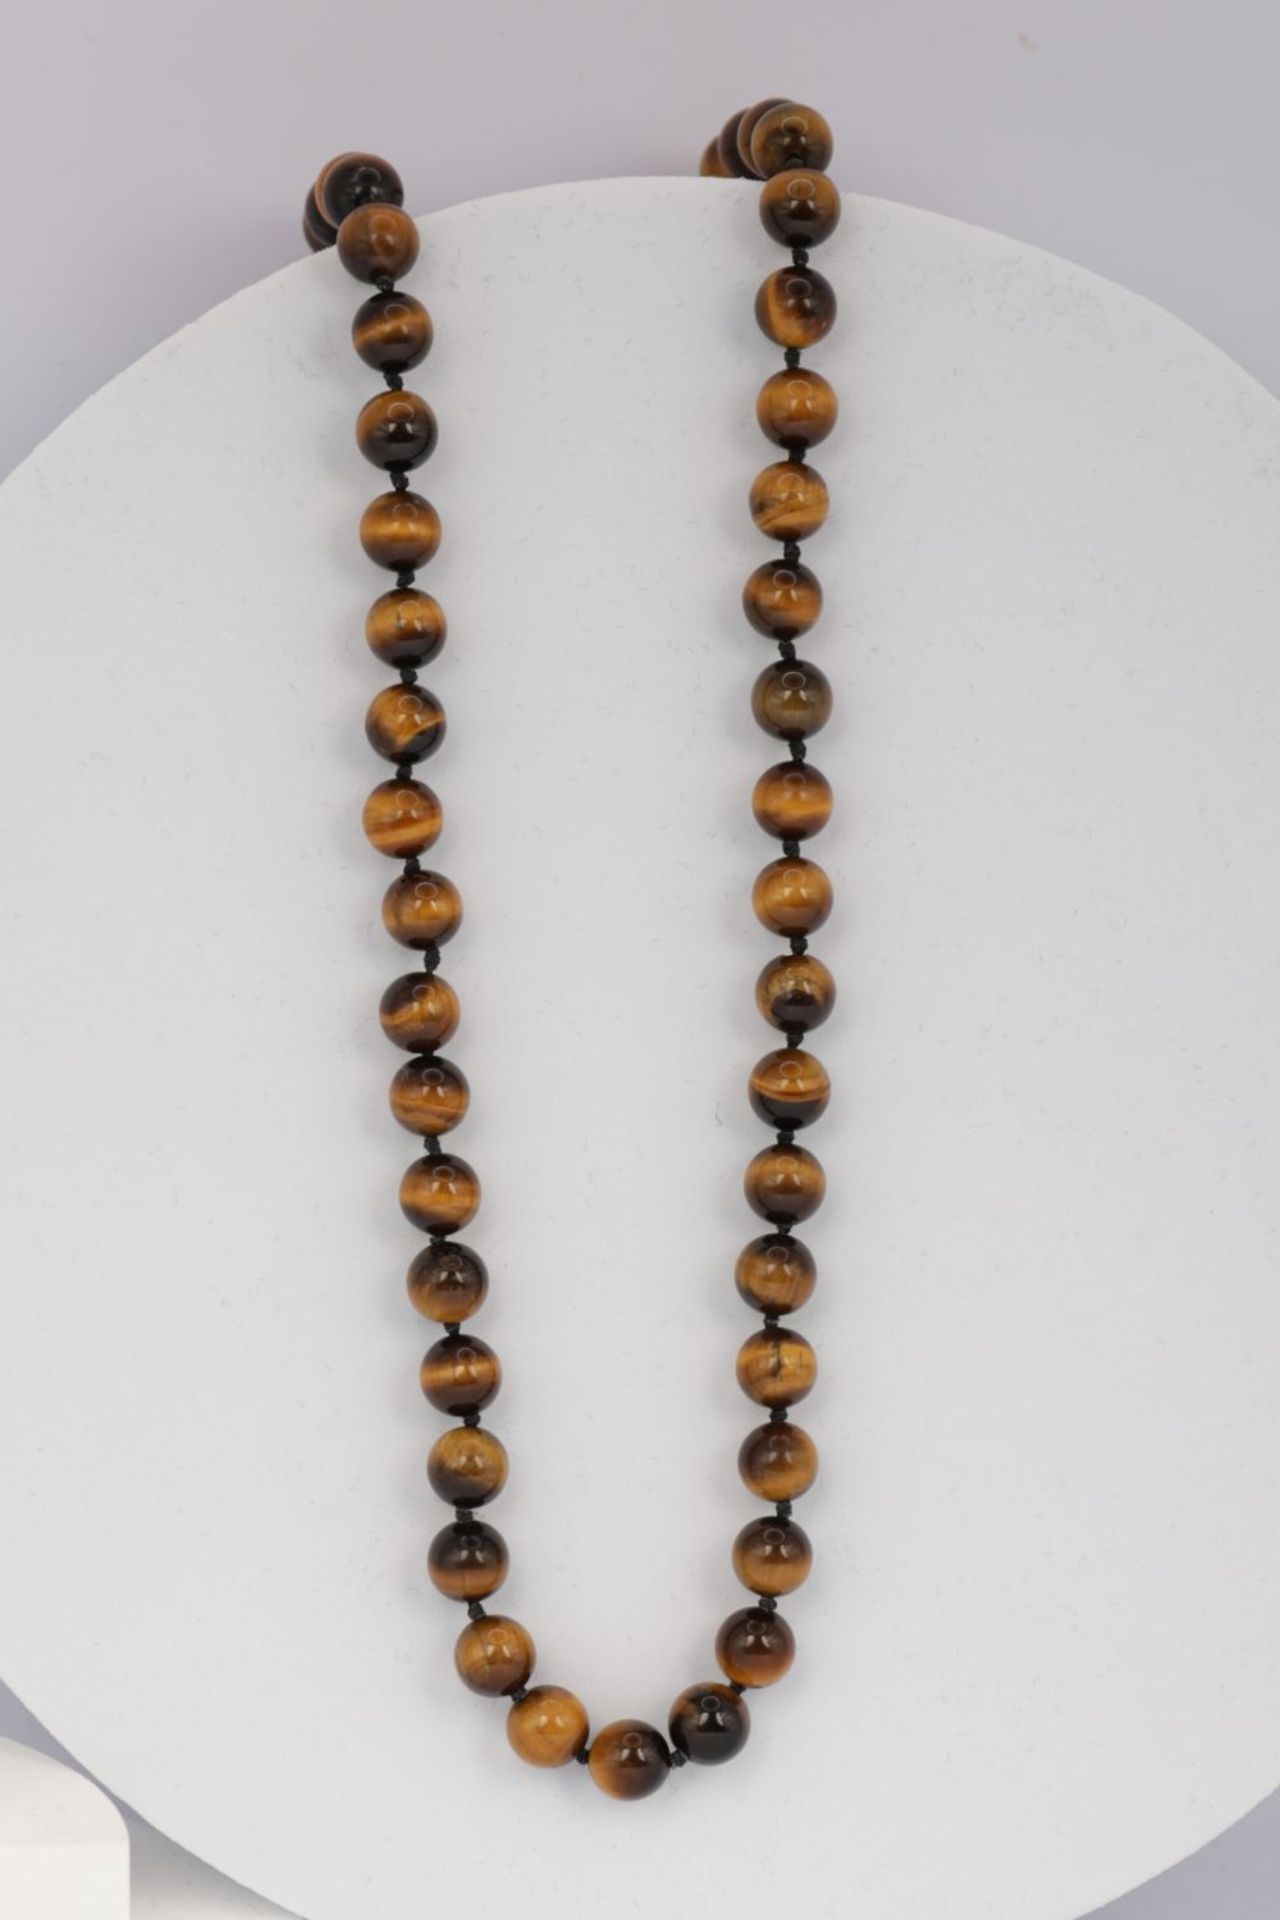 TIGER'S EYE BEAD NECKLACE - Image 4 of 4